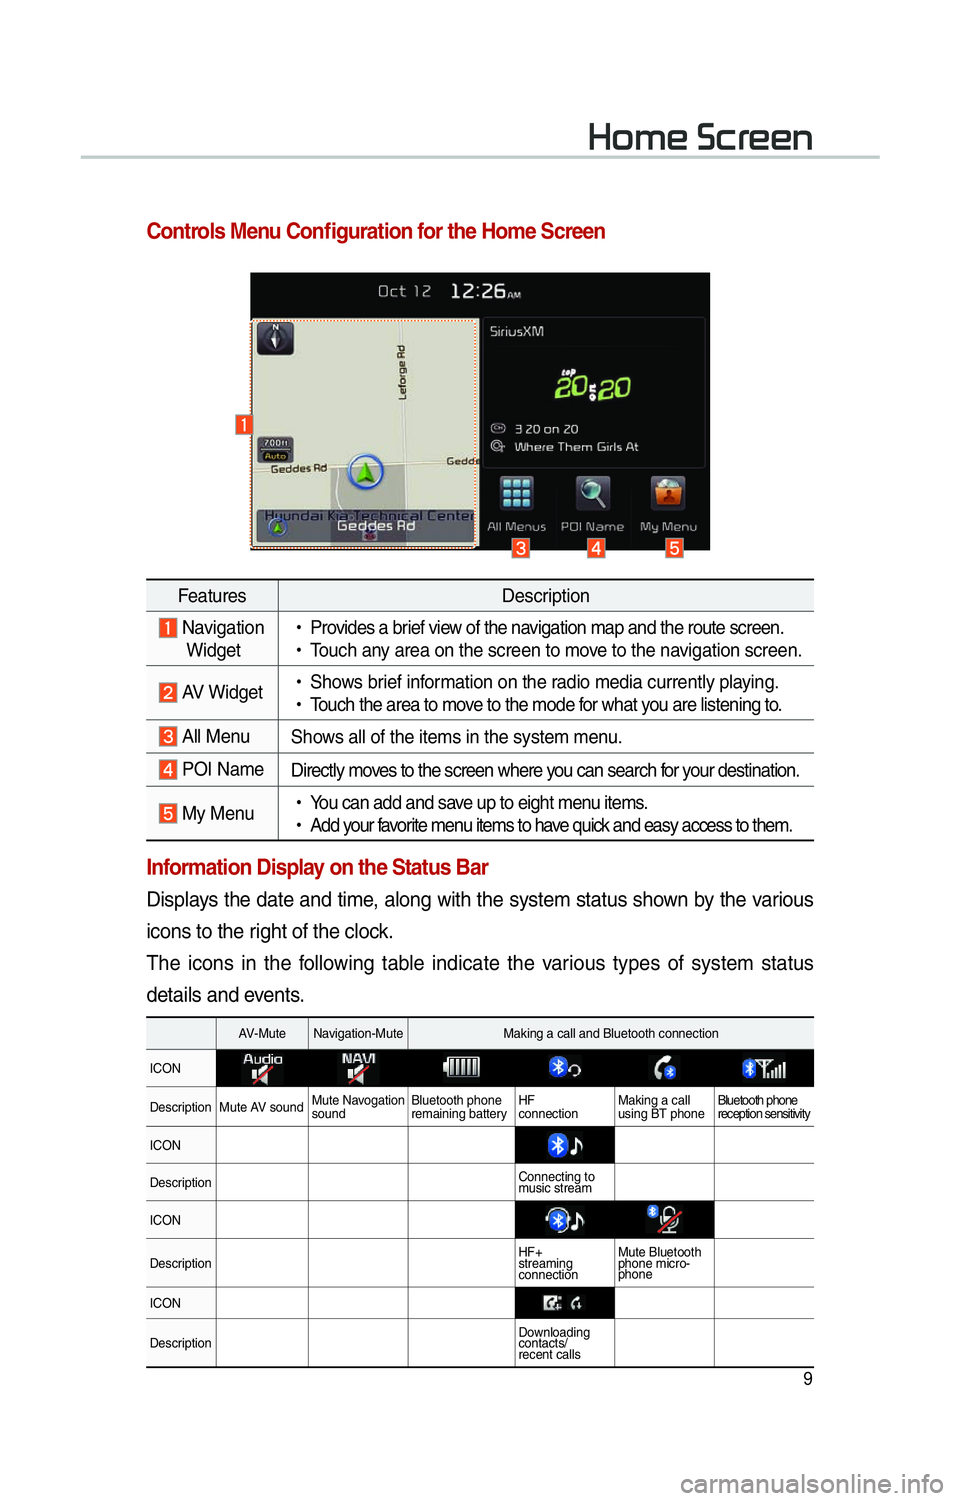 KIA SOUL 2014  Navigation System Quick Reference Guide 9
002B0052005000480003003600460055004800480051
FeaturesDescription
  Navigation
  Widget  
!Ÿ
Provides a brief view of the navigation map and the route screen.
 
!Ÿ
Touch any area on the screen to m